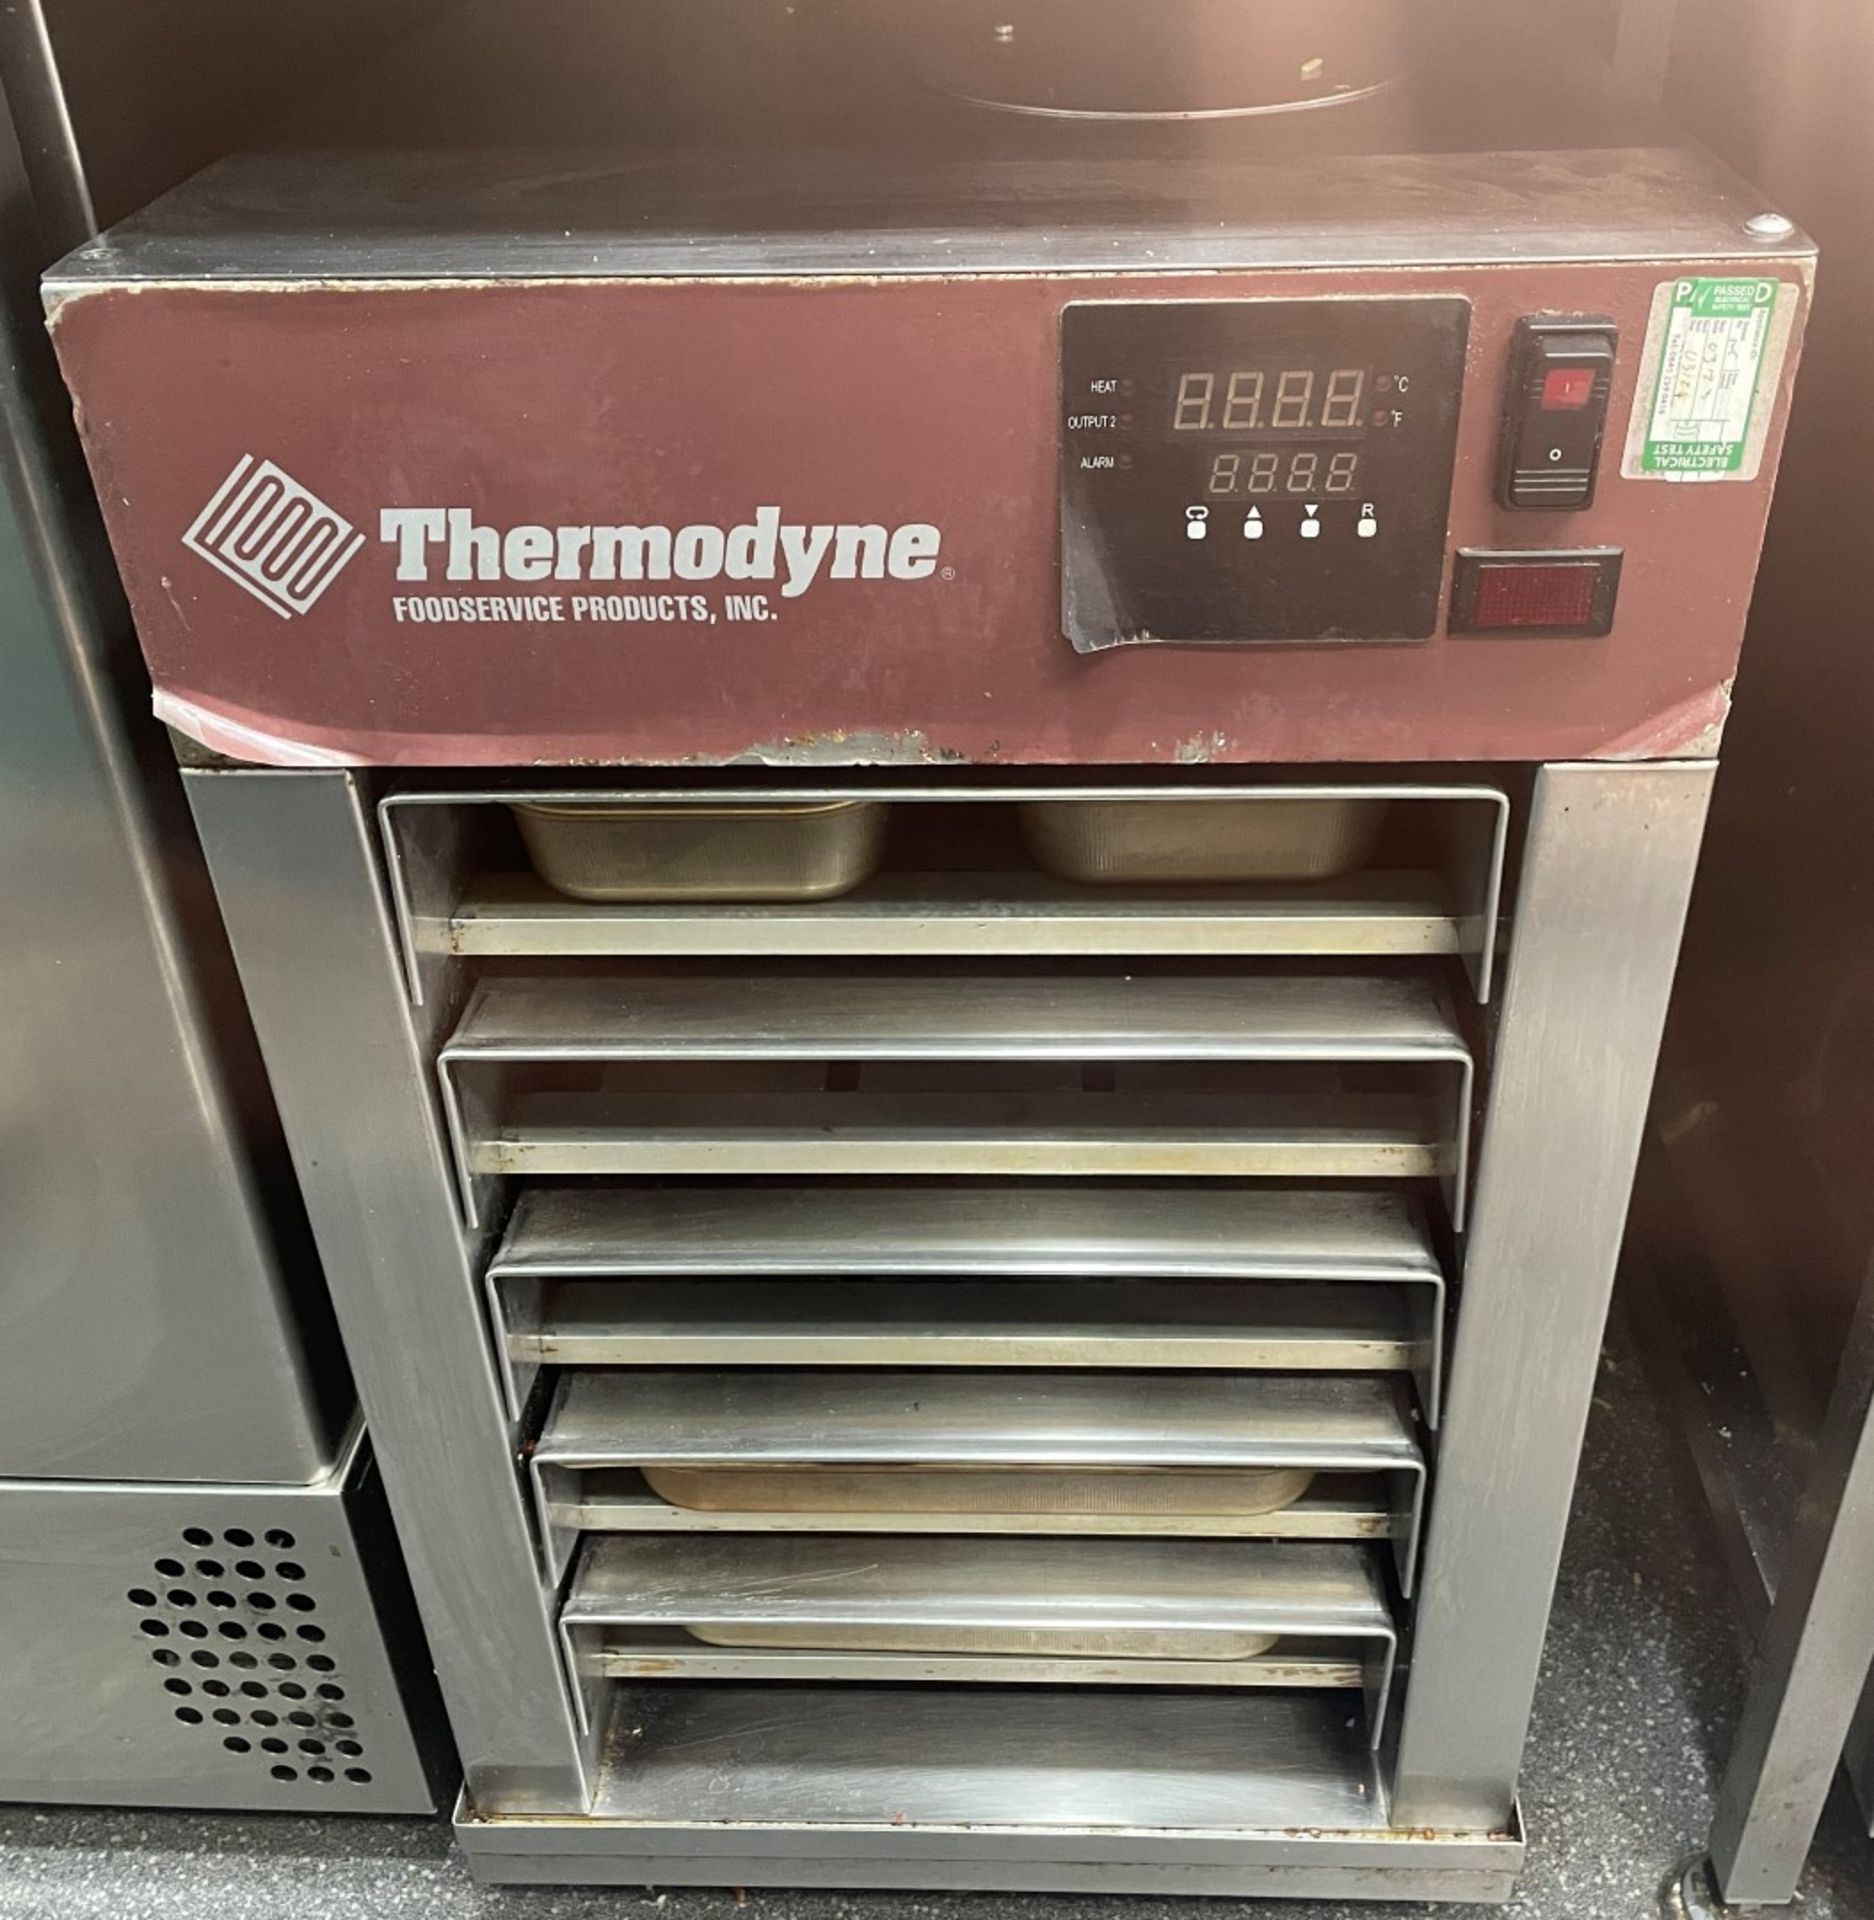 1 x -Thermodyne Counter-Top Slow Cook and Hold Oven - 240V - Image 2 of 6